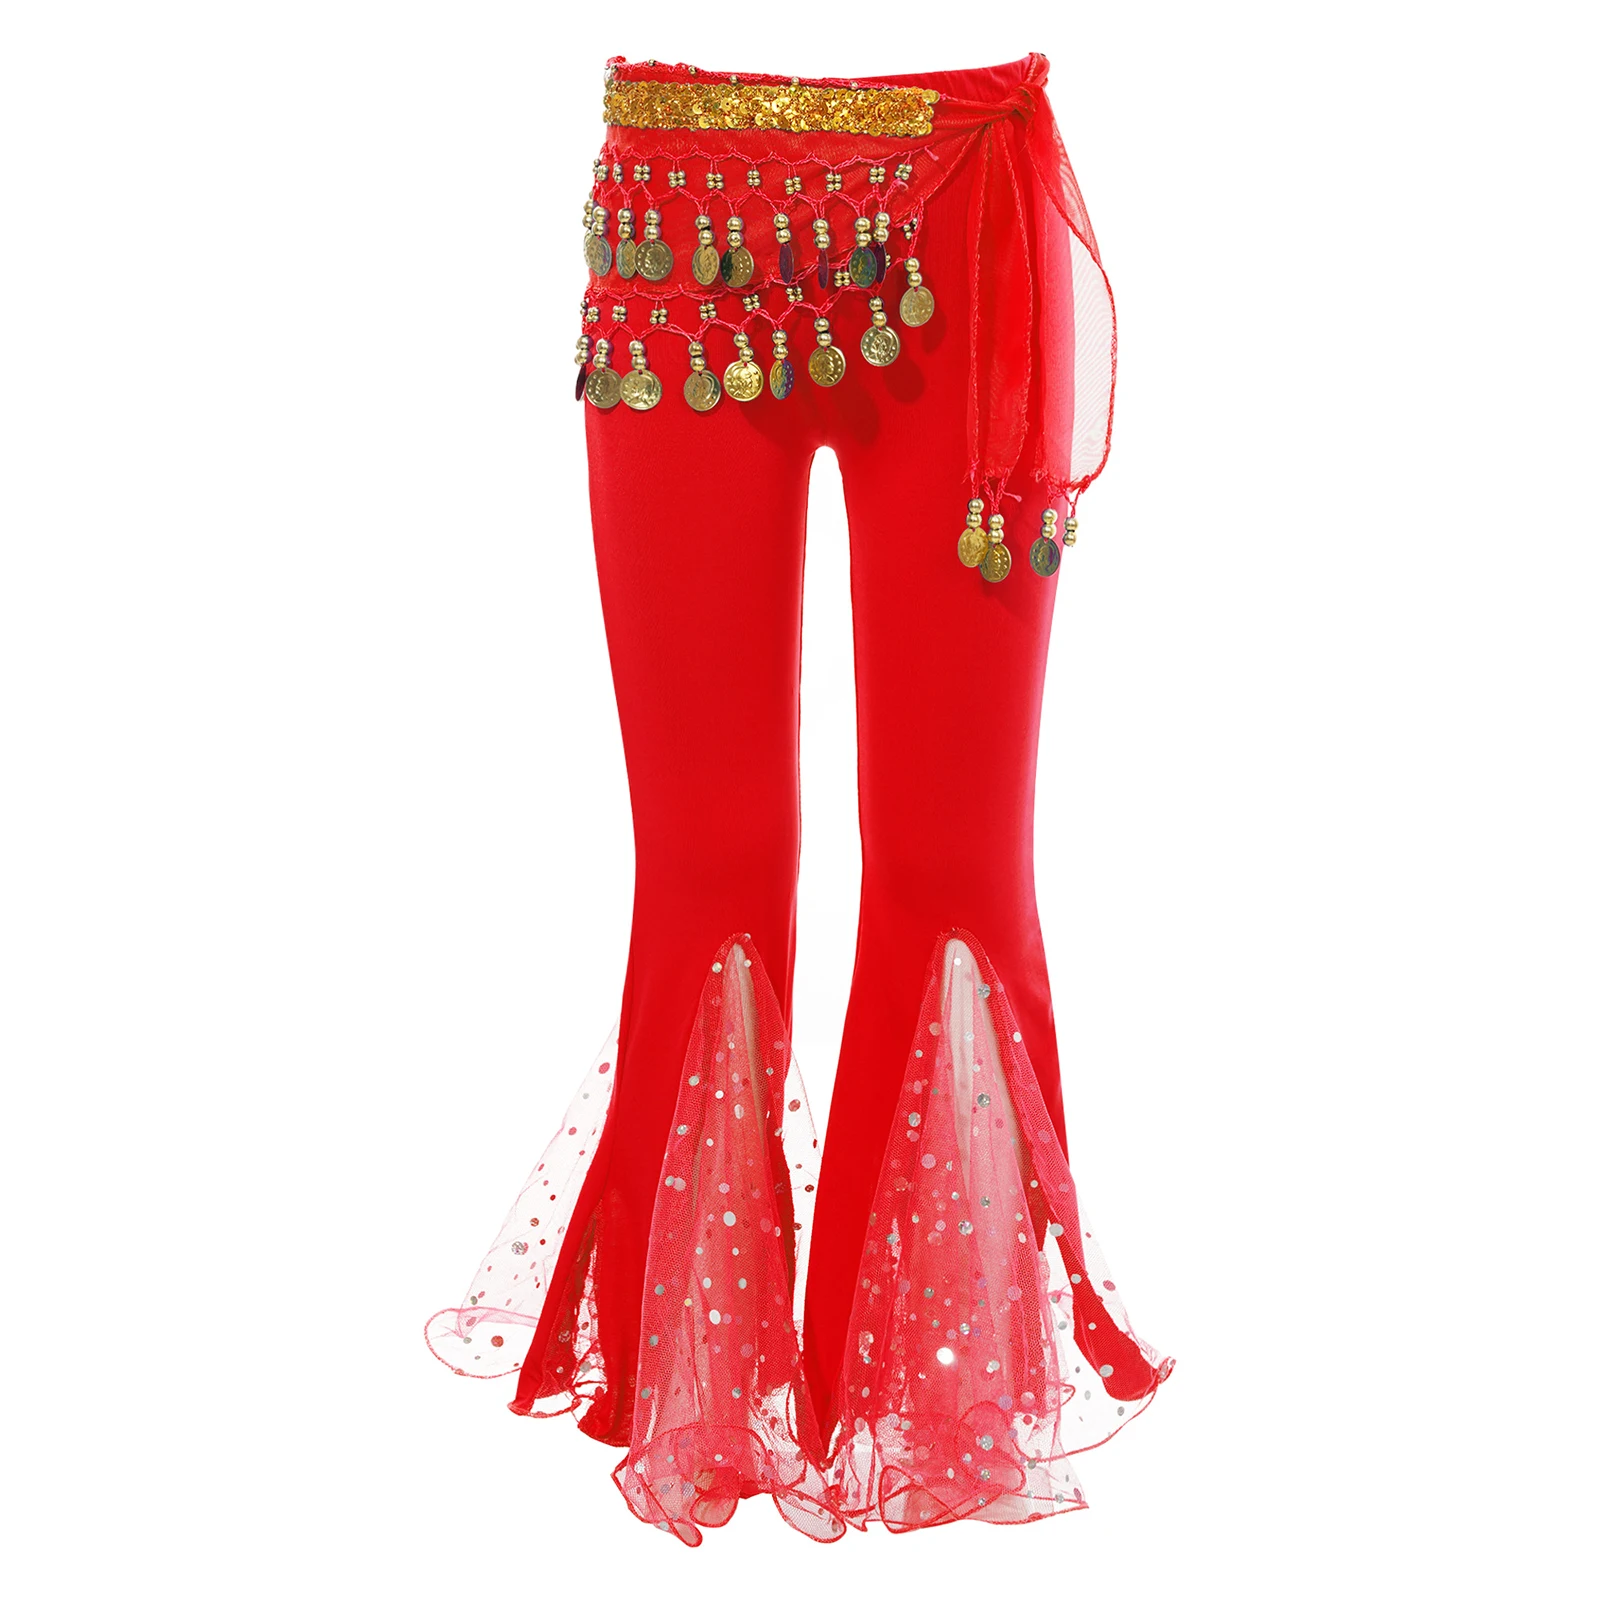 

Toddler Girls Indian Pants Egyptian Dance Costume Kids Sequined Dots Flared Pants with Beads Coins Tassels Waist Chain Hip Scarf